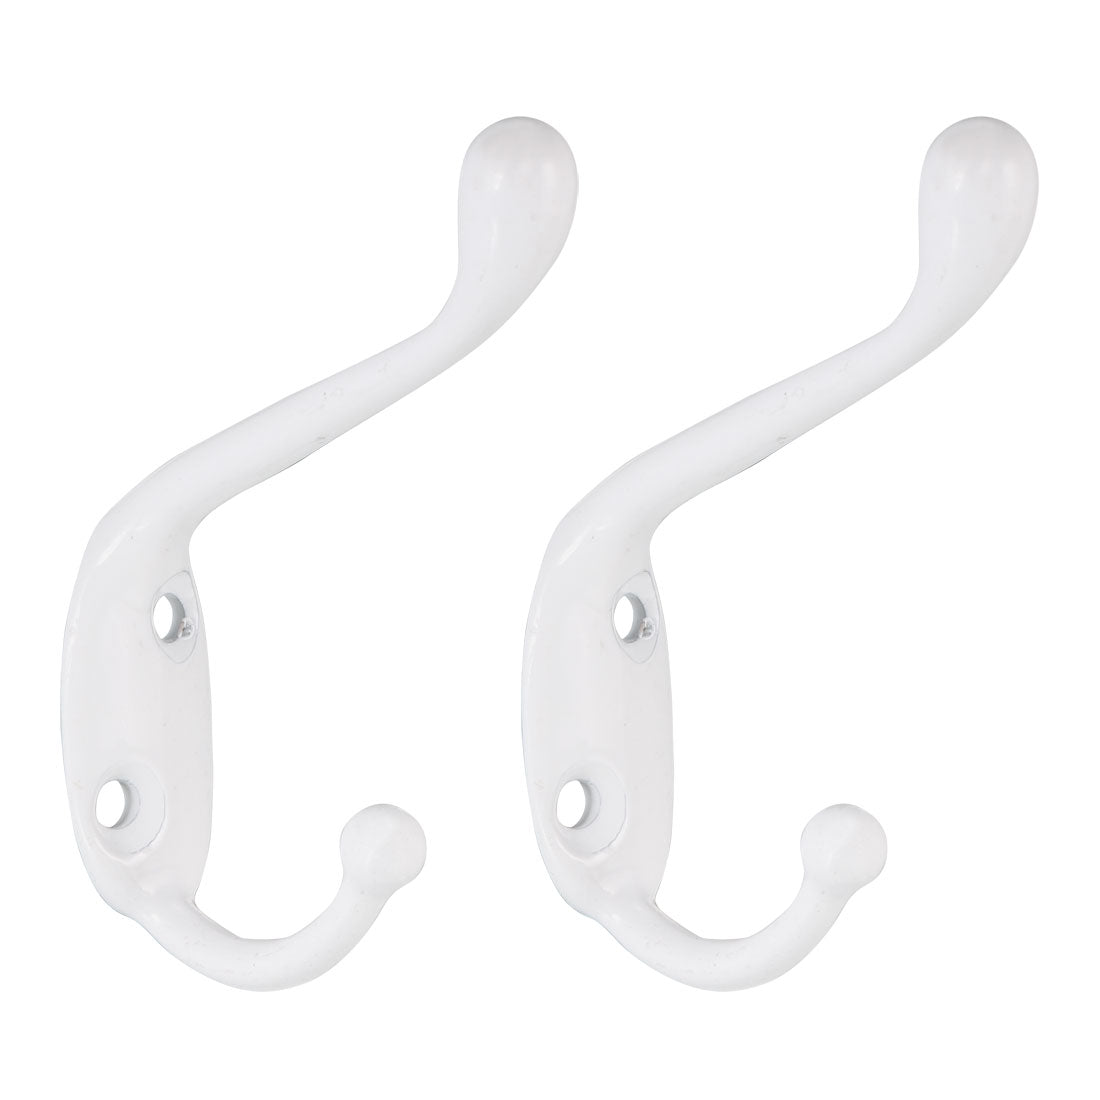 uxcell Uxcell Dual Prong Coat Hooks Wall Mounted Retro Double Hooks Utility White Hook for Coat Scarf Bag Towel Key Cap Cup Hat 80mm x 17mm x 55mm 2pcs